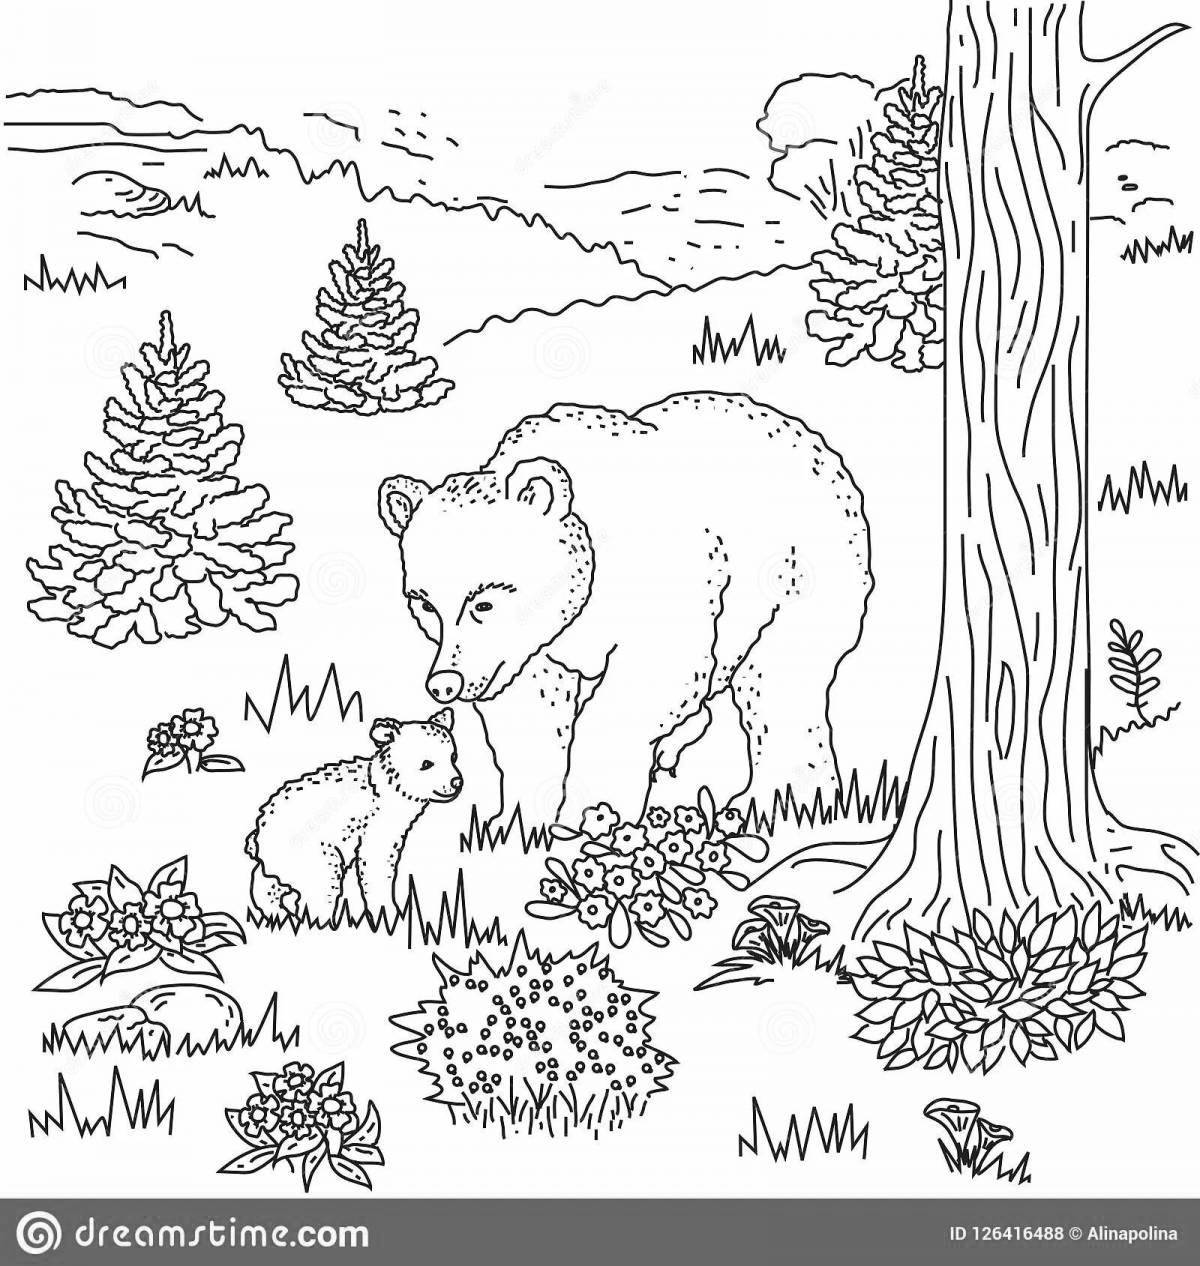 Bear in the forest #10